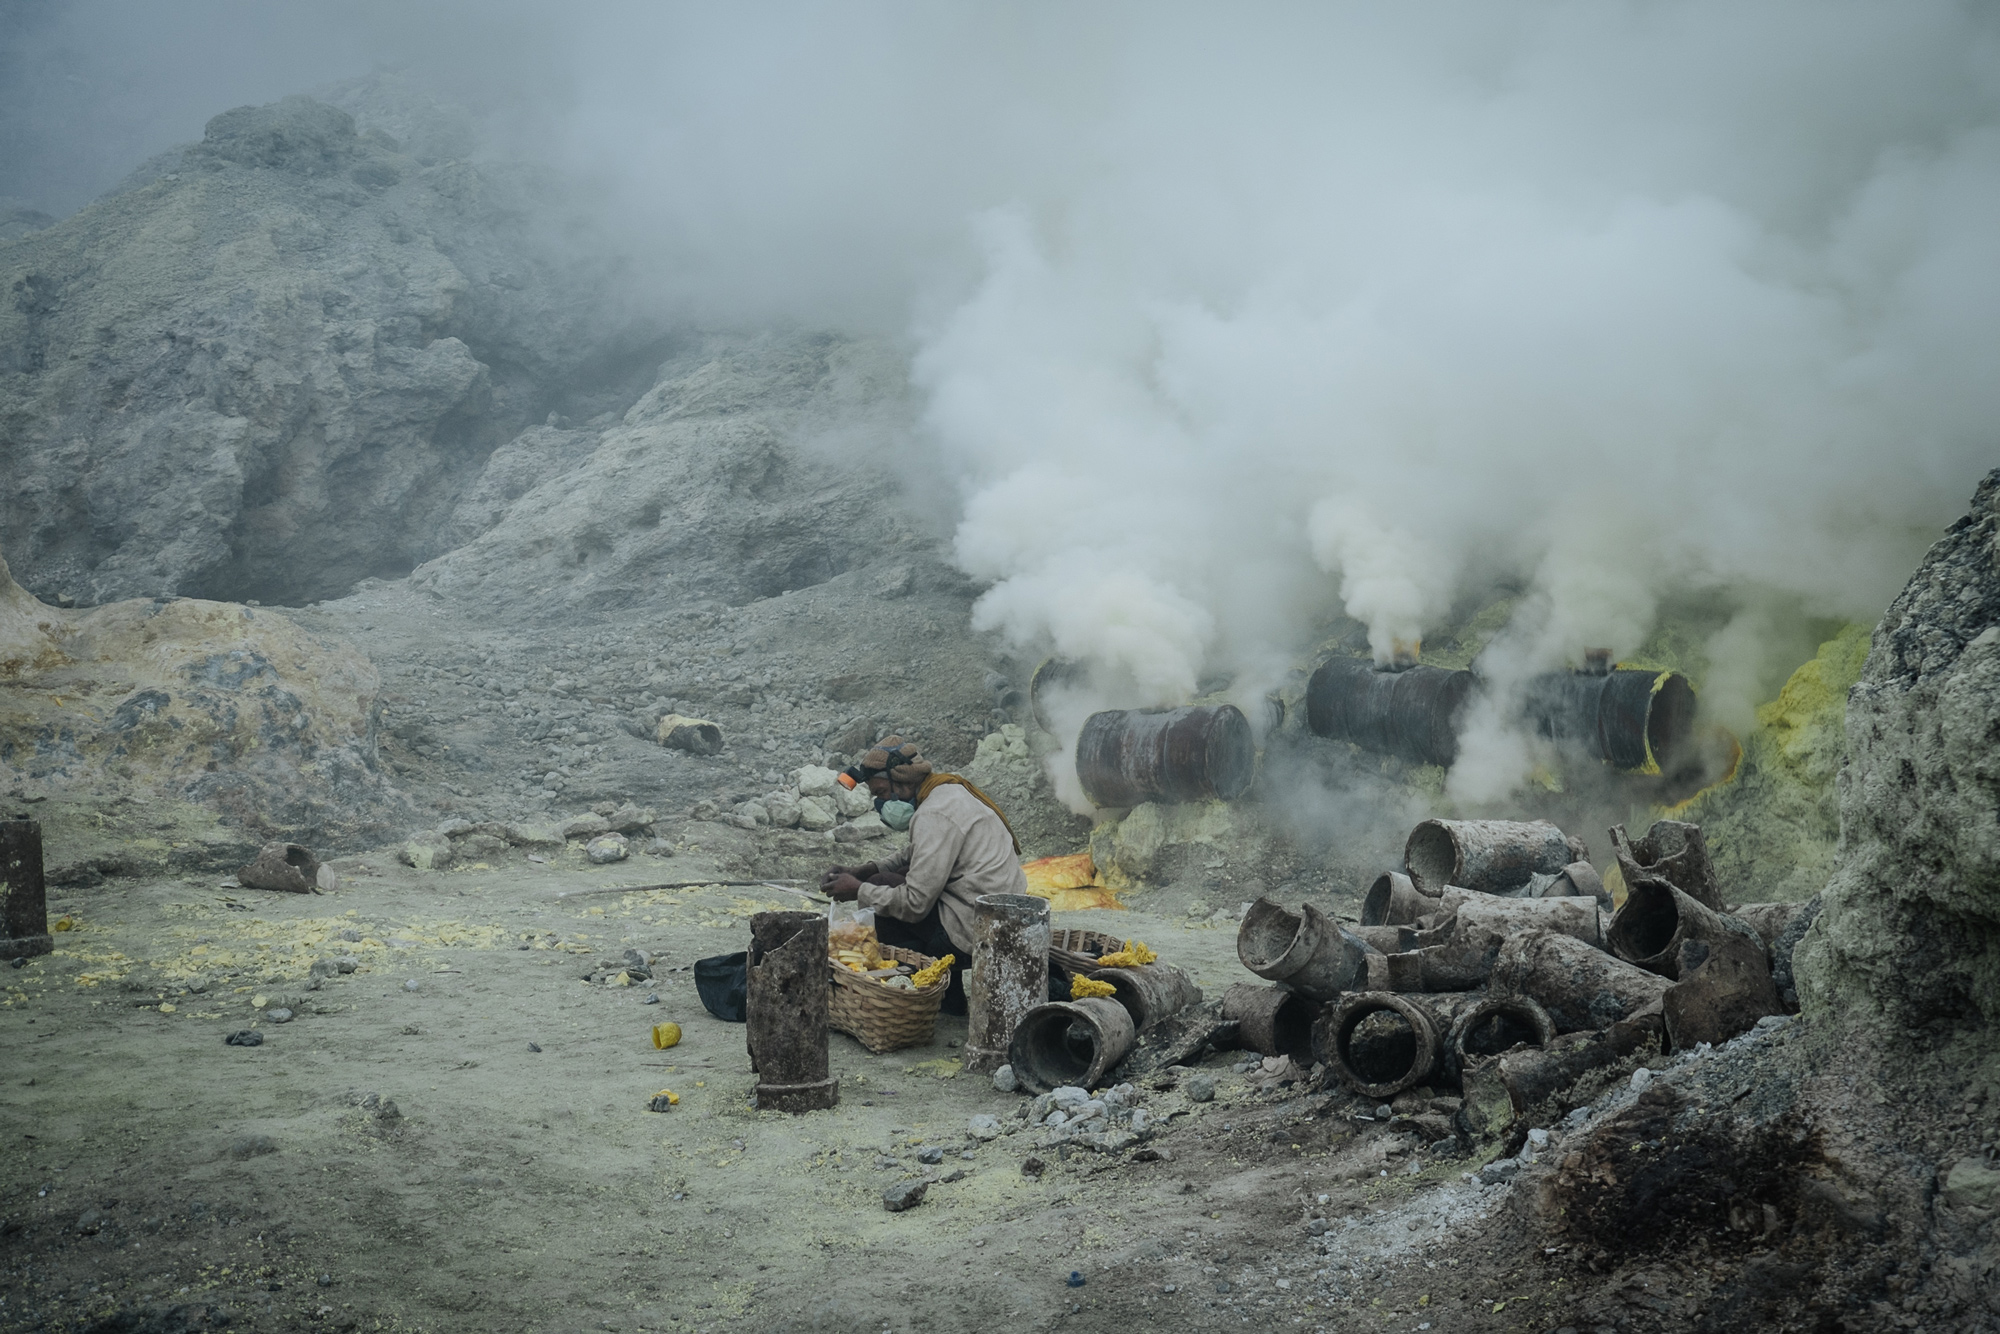 A miner works to break up the bright yellow rocks of Sulphur after it spills out of ceramic pipes. These pipes channel the volcanic gases, condensing them to form solid sulphur.